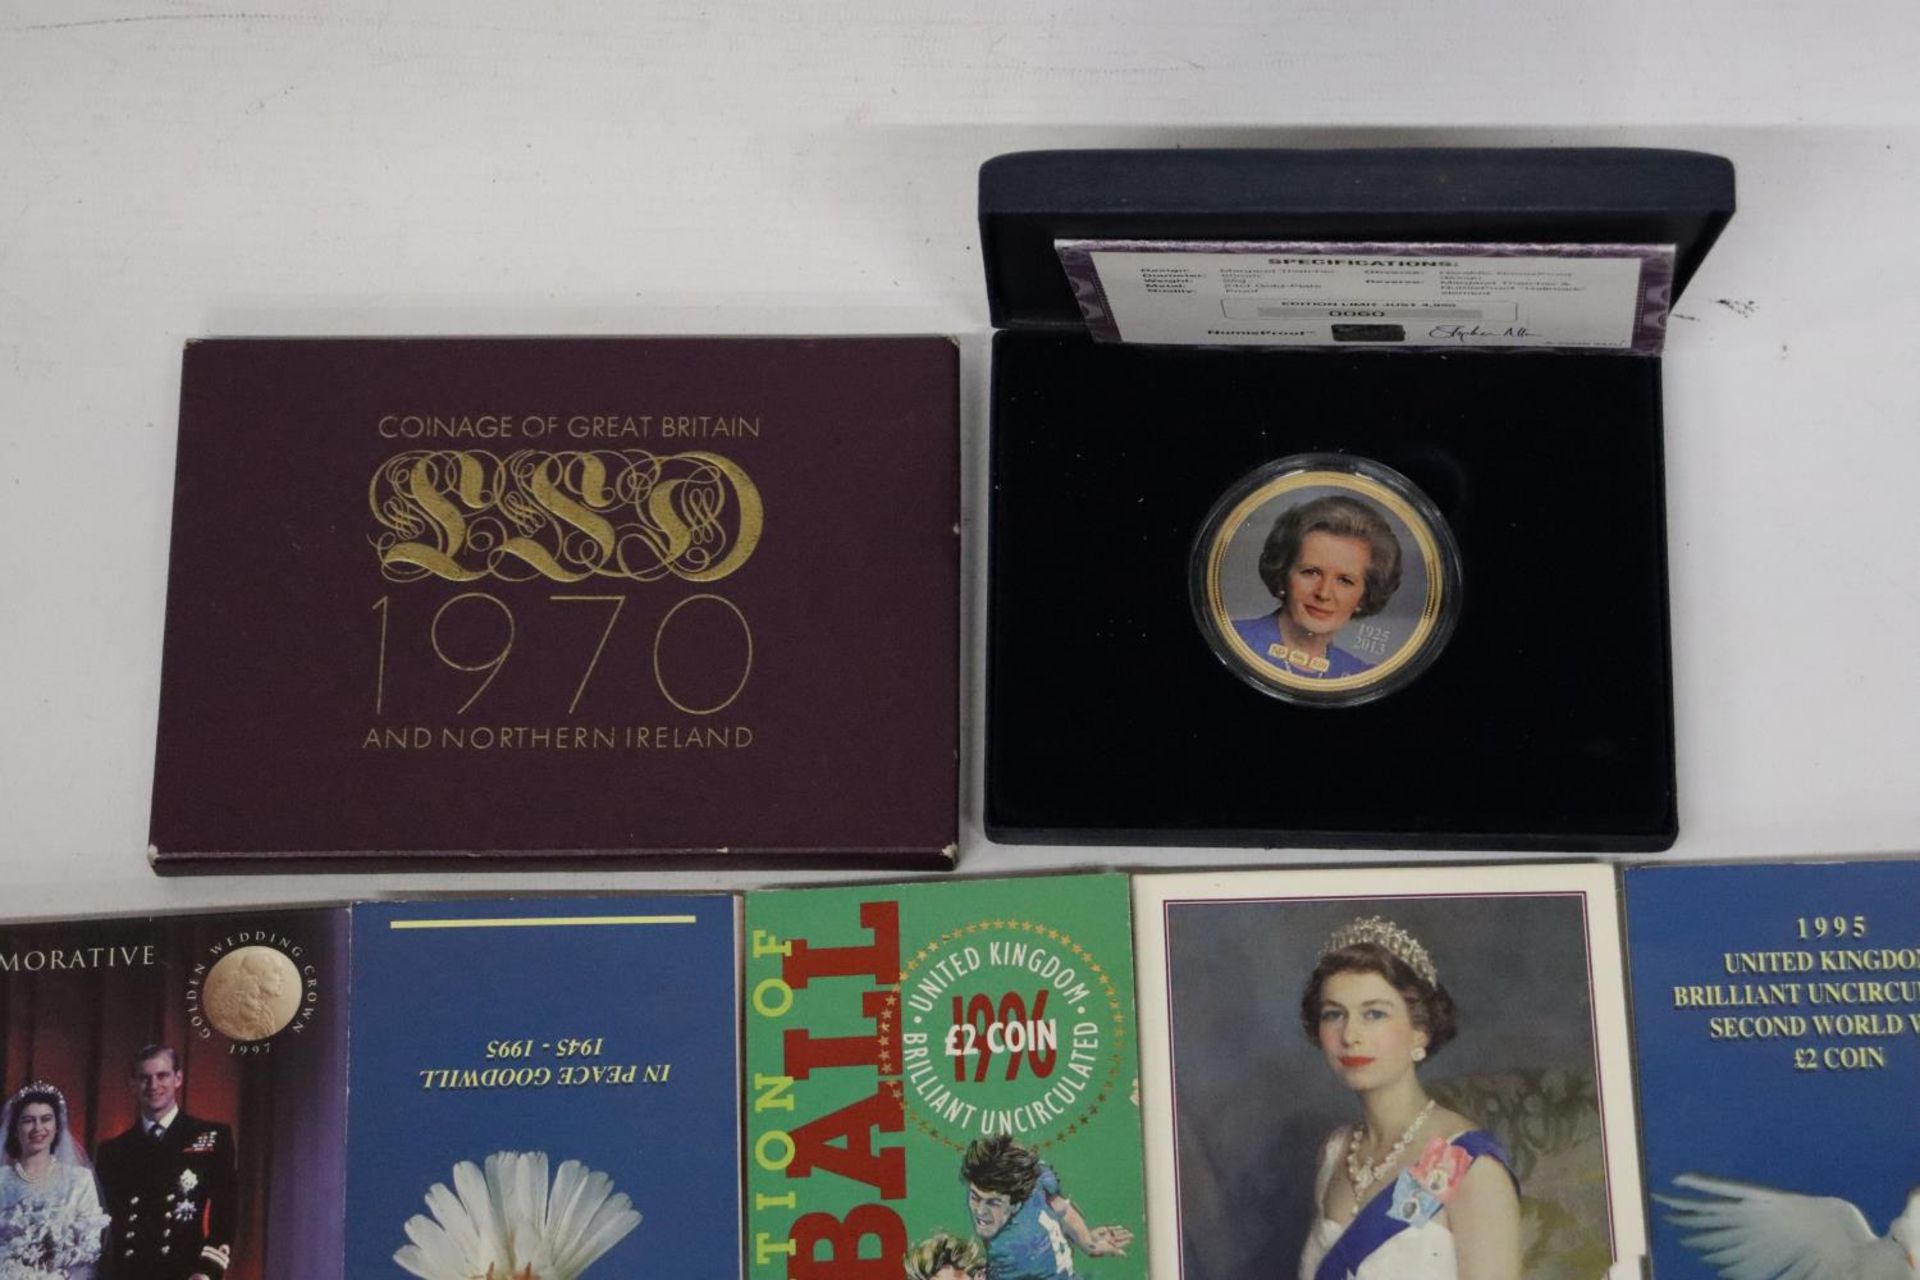 A SELECTION OF 7 UK COIN PACKS , 1 X 1970, 1 X ’71, PLUS BOXED MEDALLION OF MARGARET THATCHER - Image 3 of 7